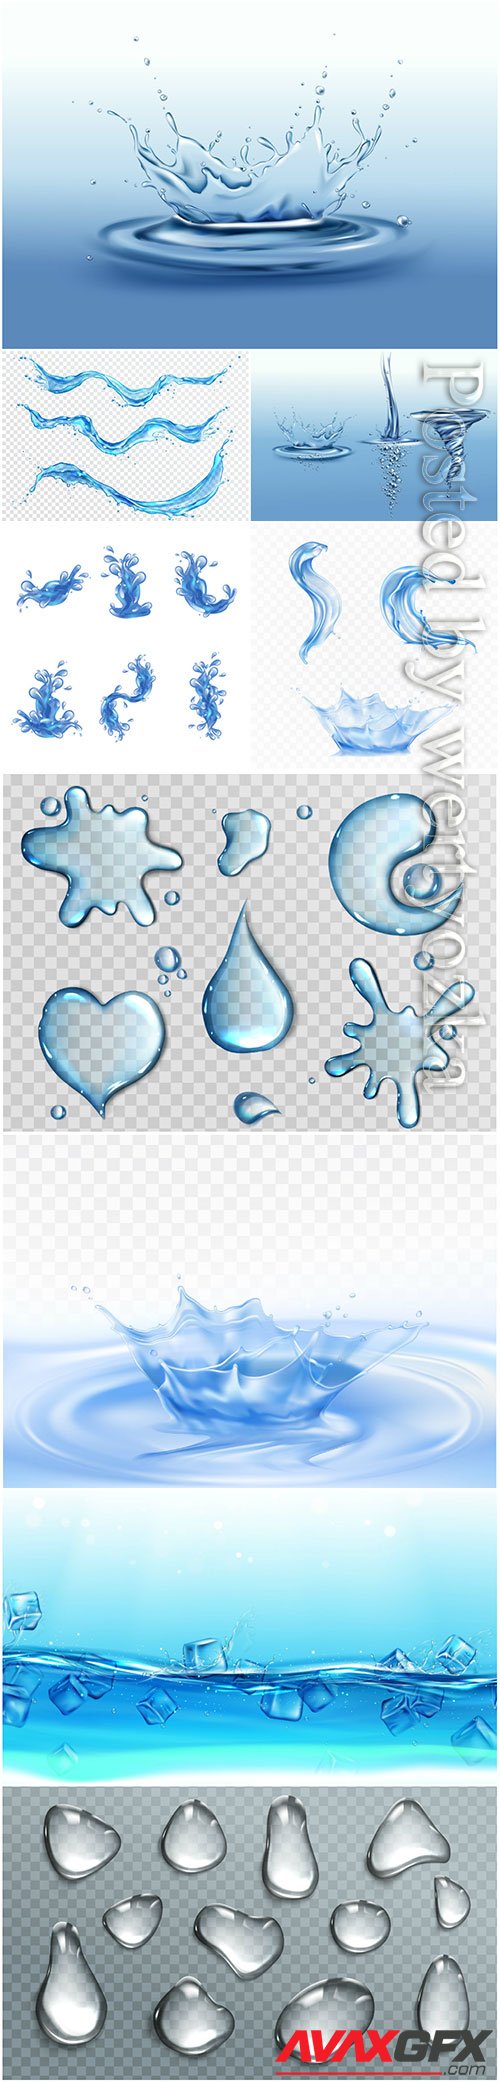 Water bottle ad banner, flask with drink, splashing water drops in vector # 4